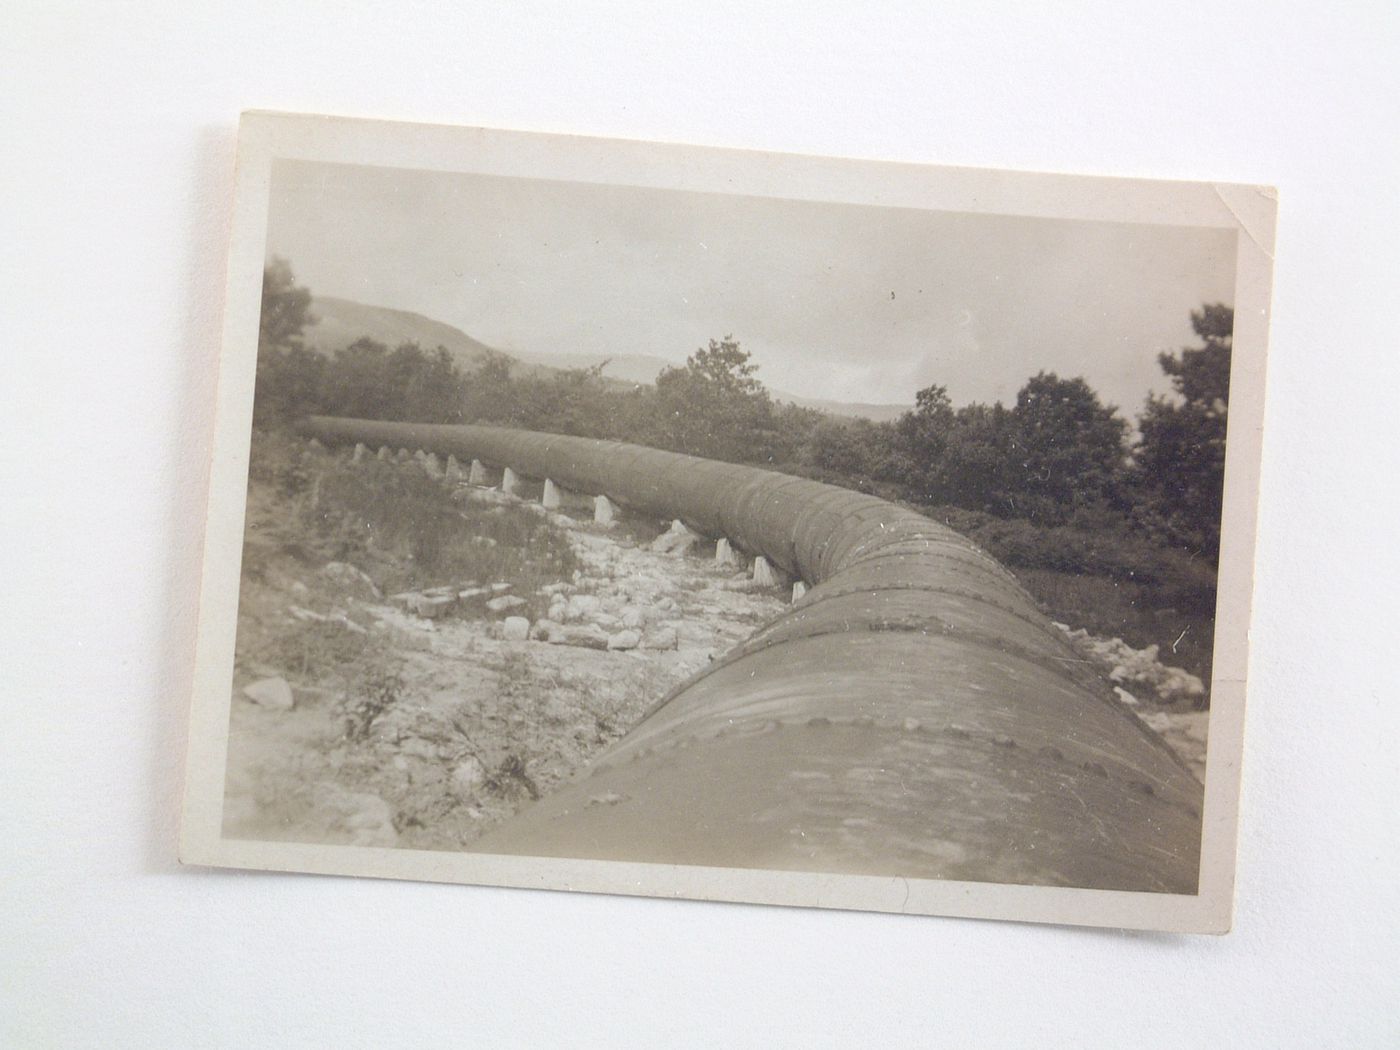 View of pipeline in rural area, unknown location